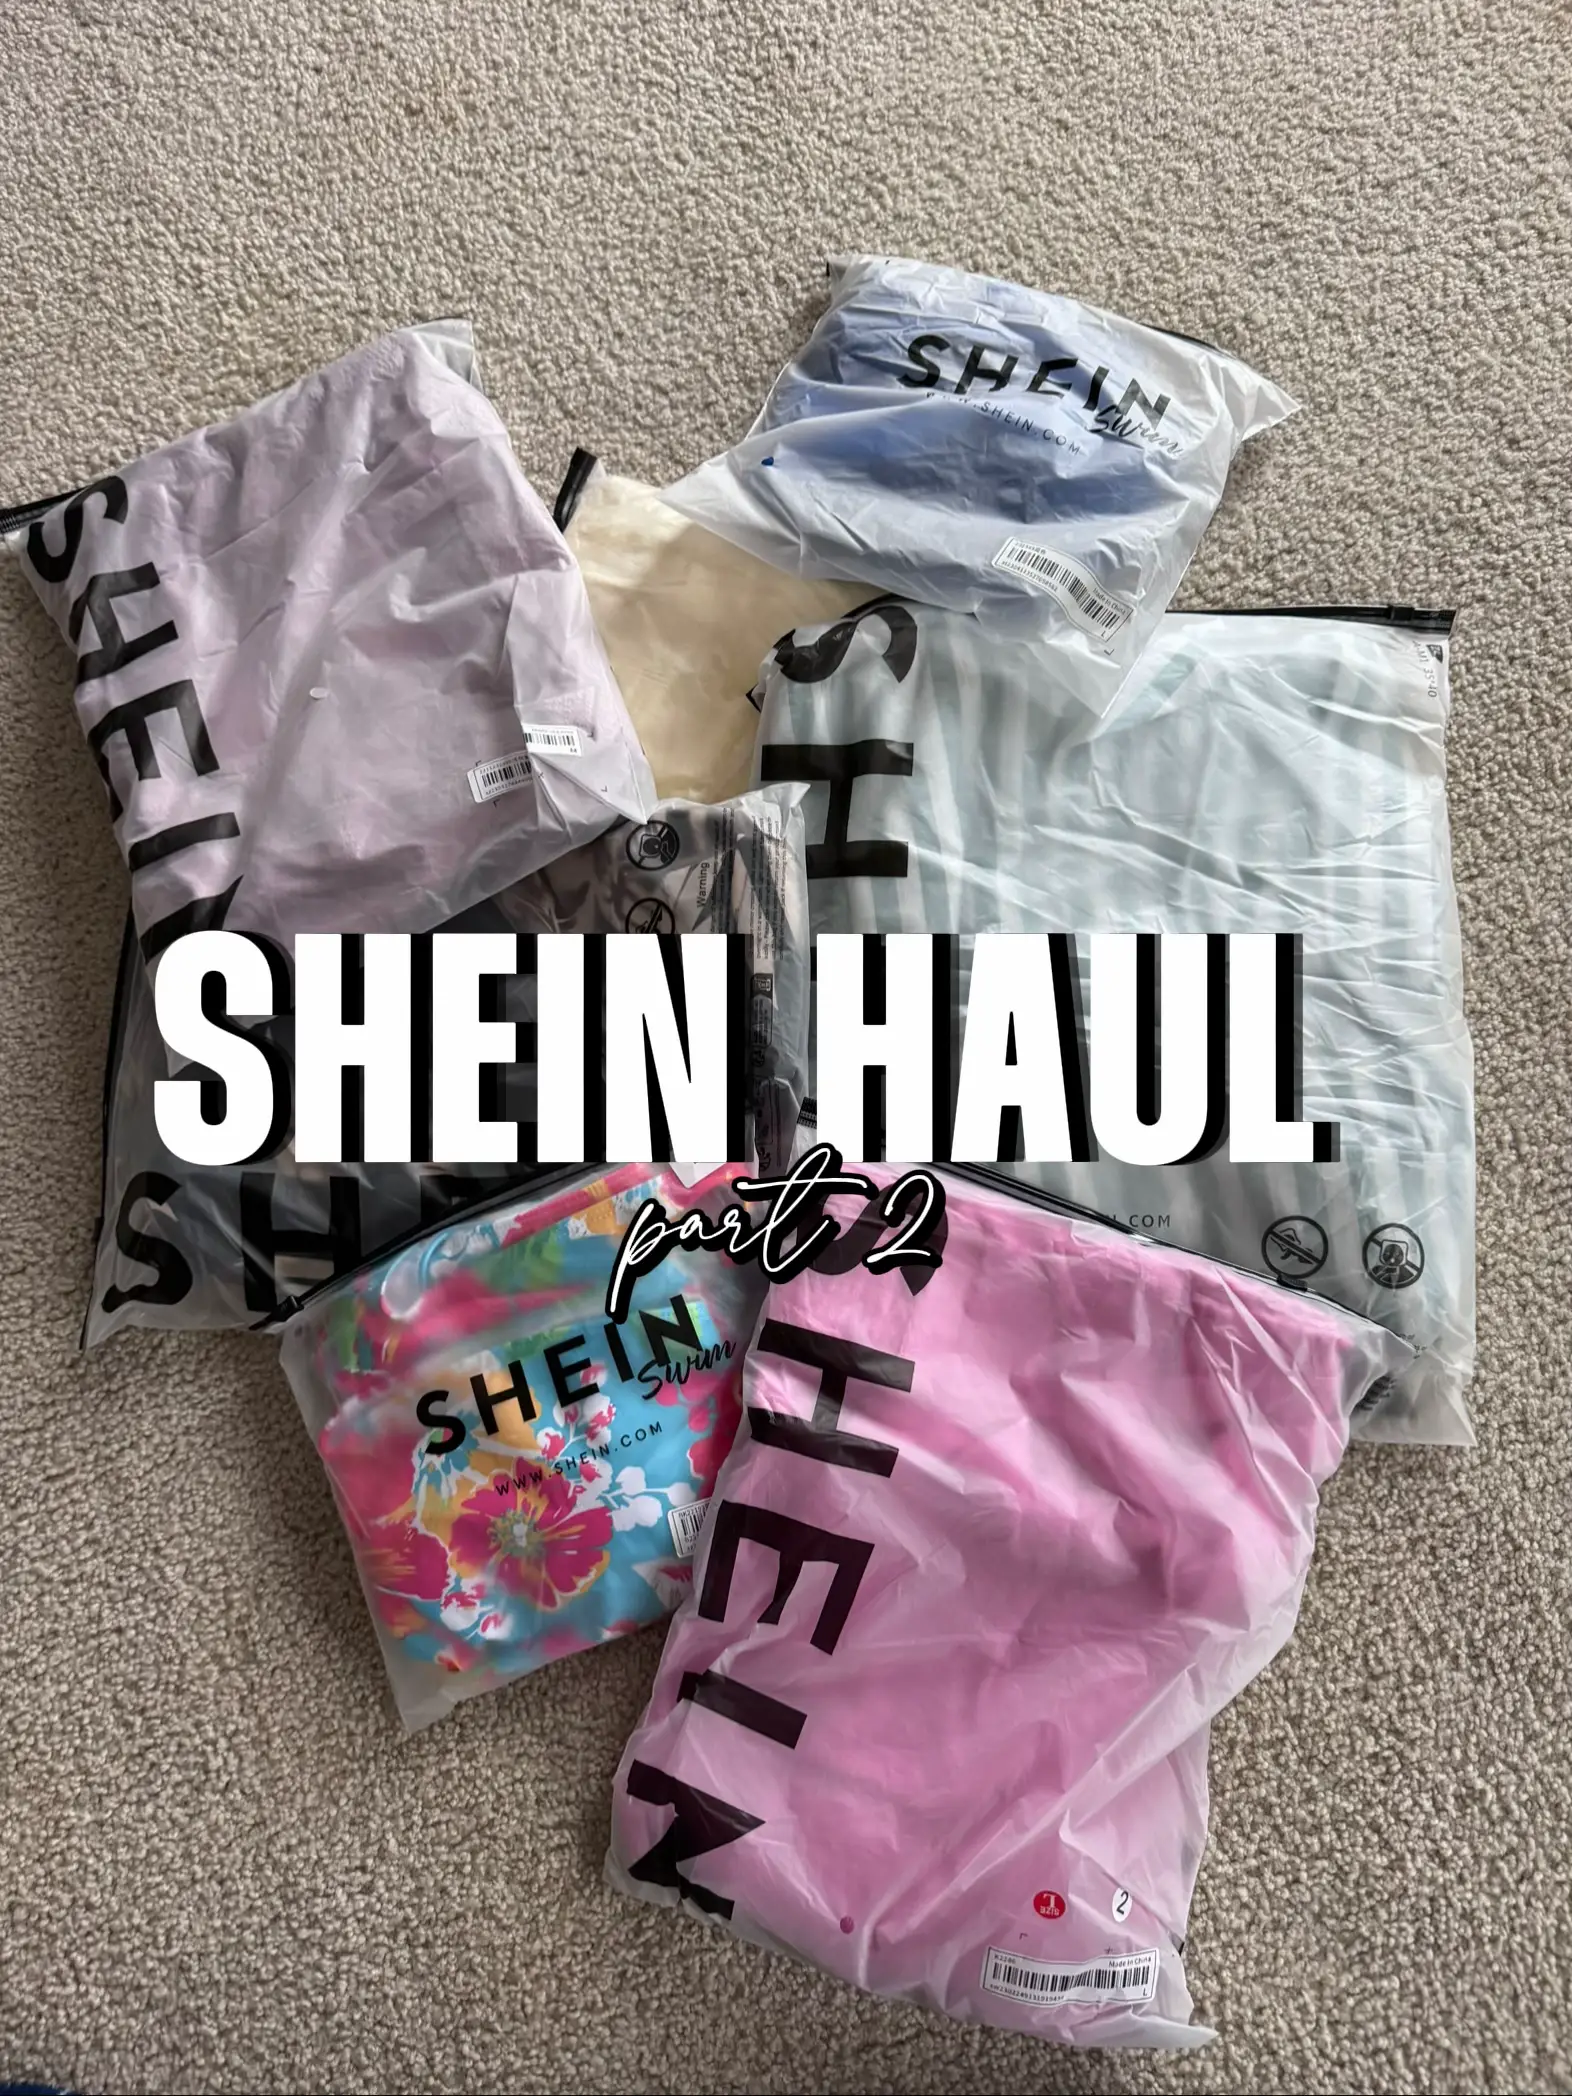 SHEIN mid-sized girlies shapewear!! Have you tried it!!! #shein